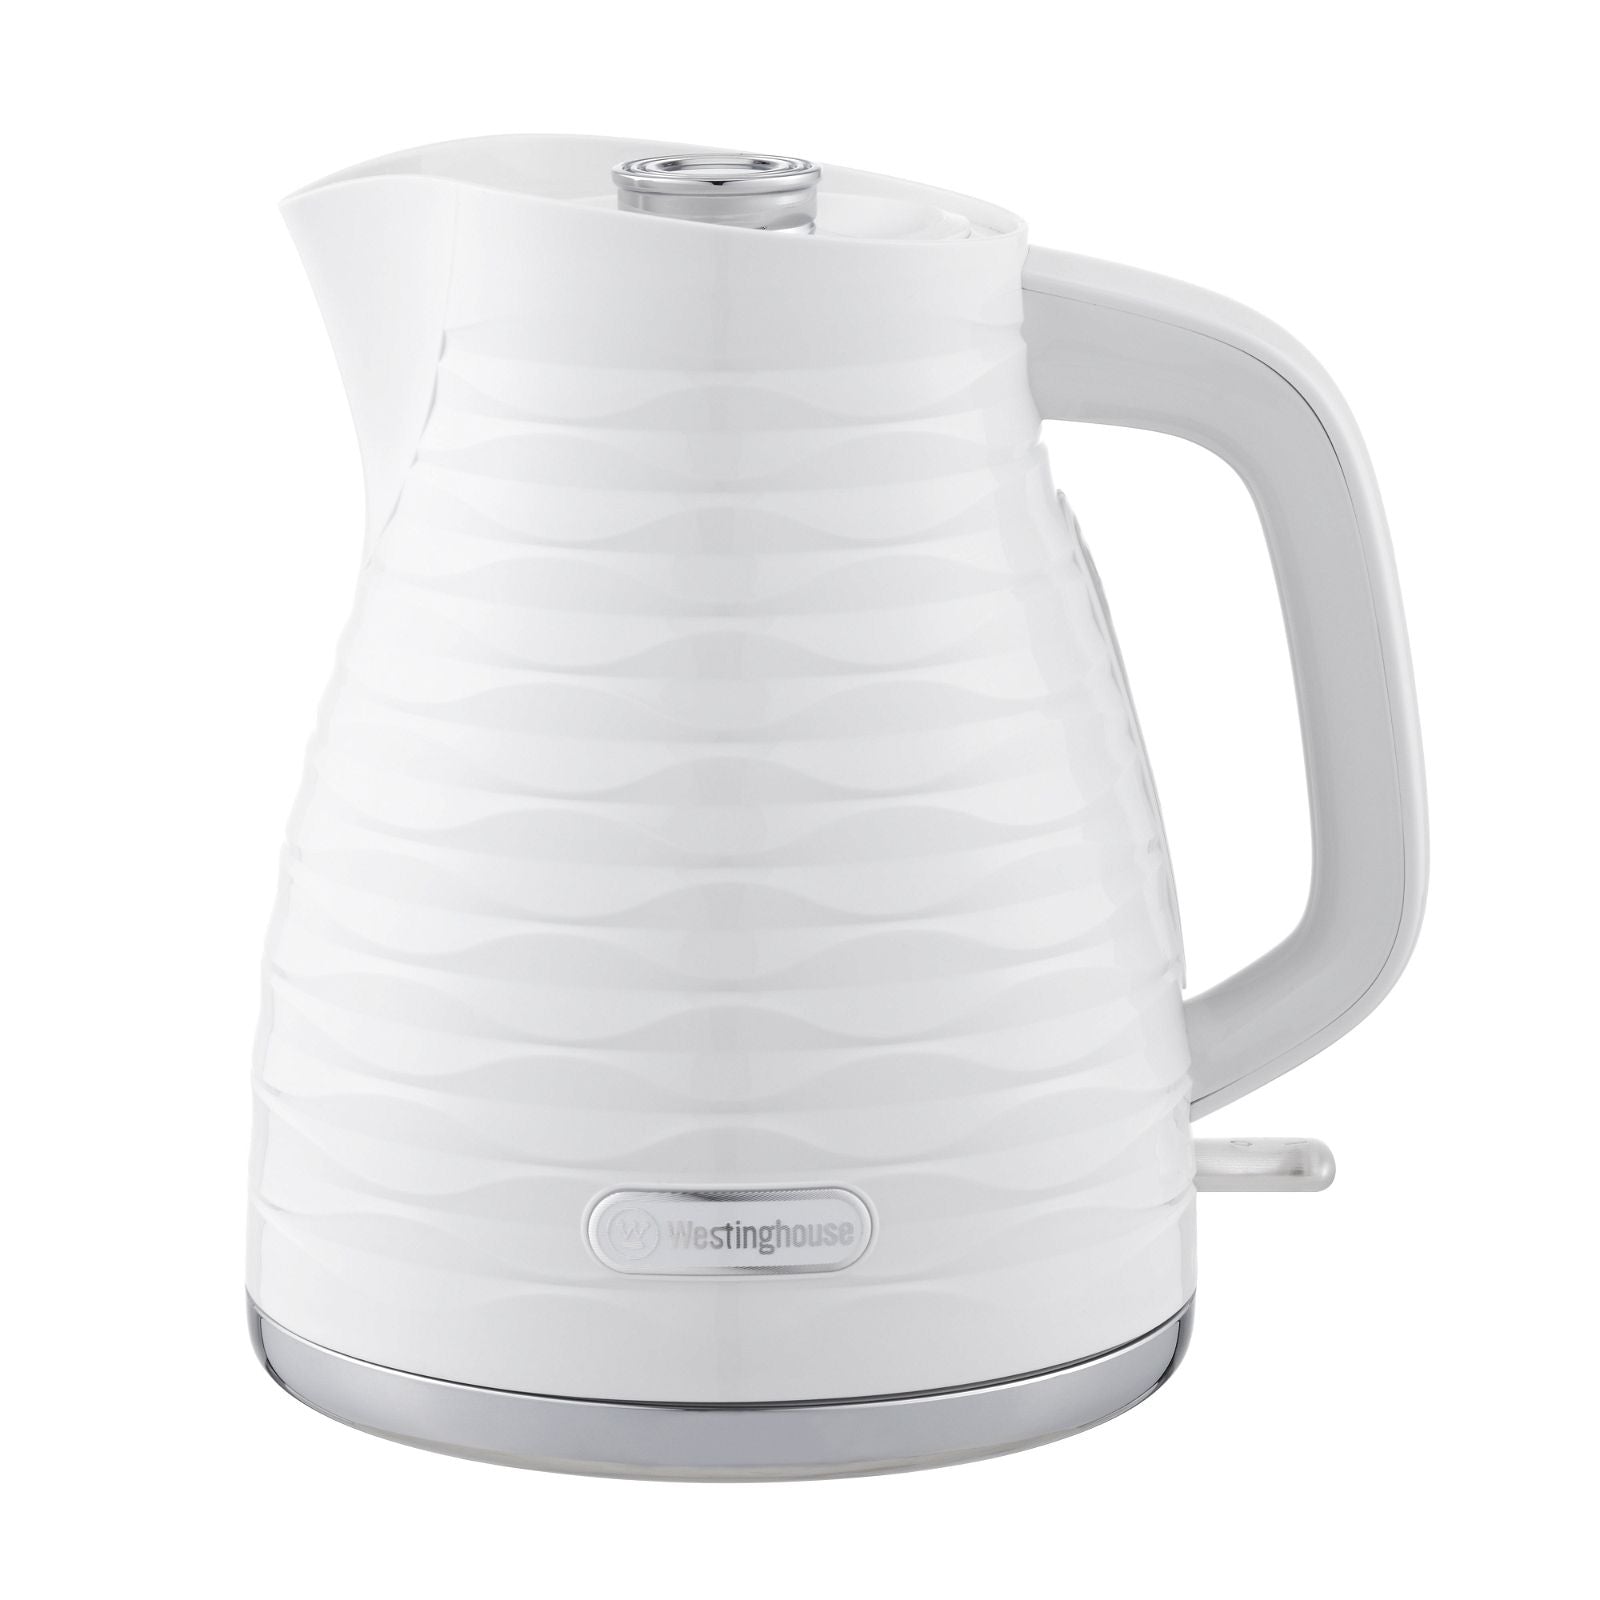 Westinghouse Kettle & Toaster Pack 1.7L Kettle, 2 Slice Toaster White-#product_category#- Distributed by:  under license